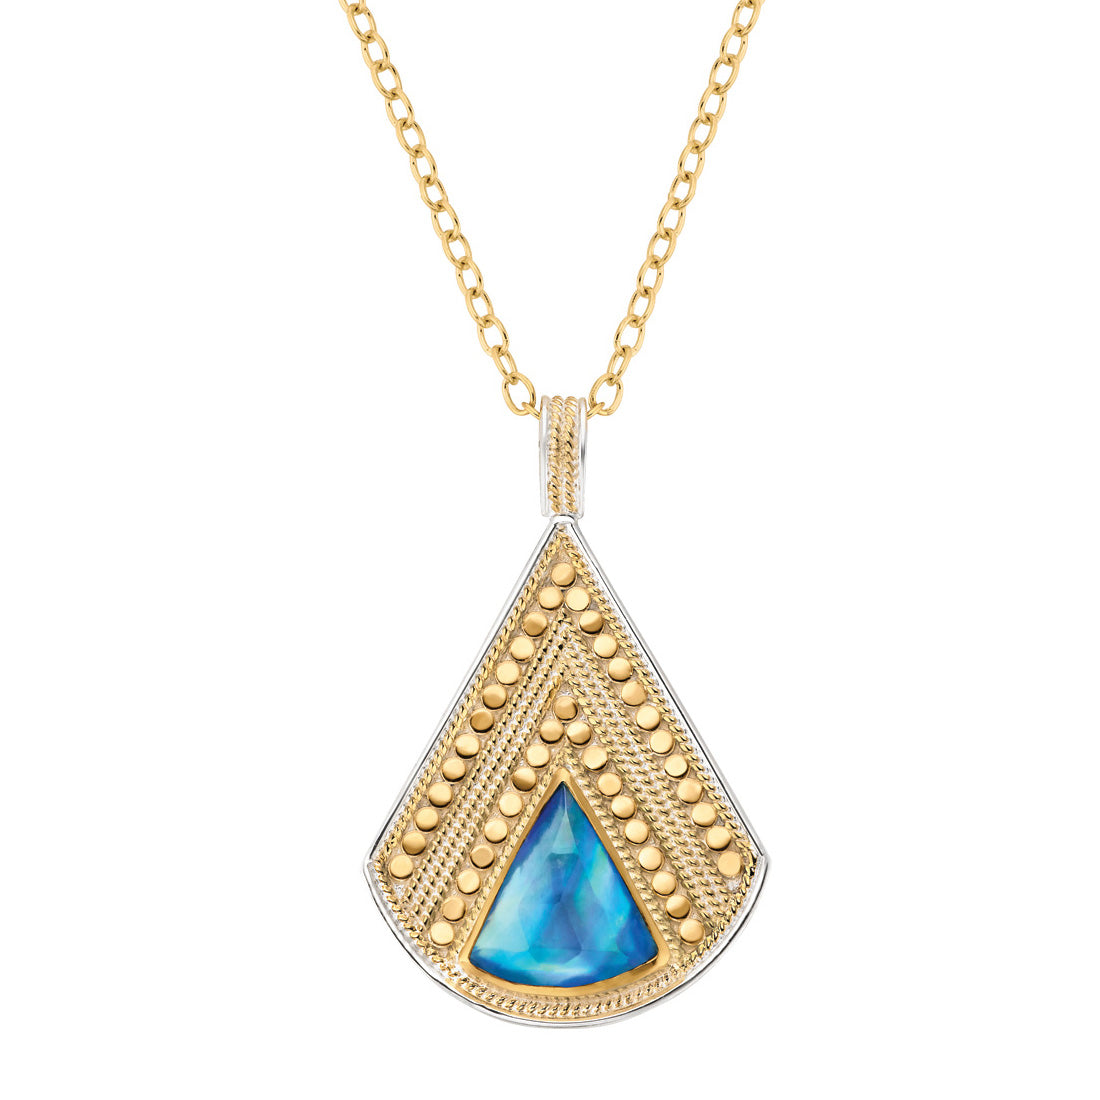 Ana Beck 18k gold plated and sterling silver Lapis Multi-Disk Drop Necklace - Gold